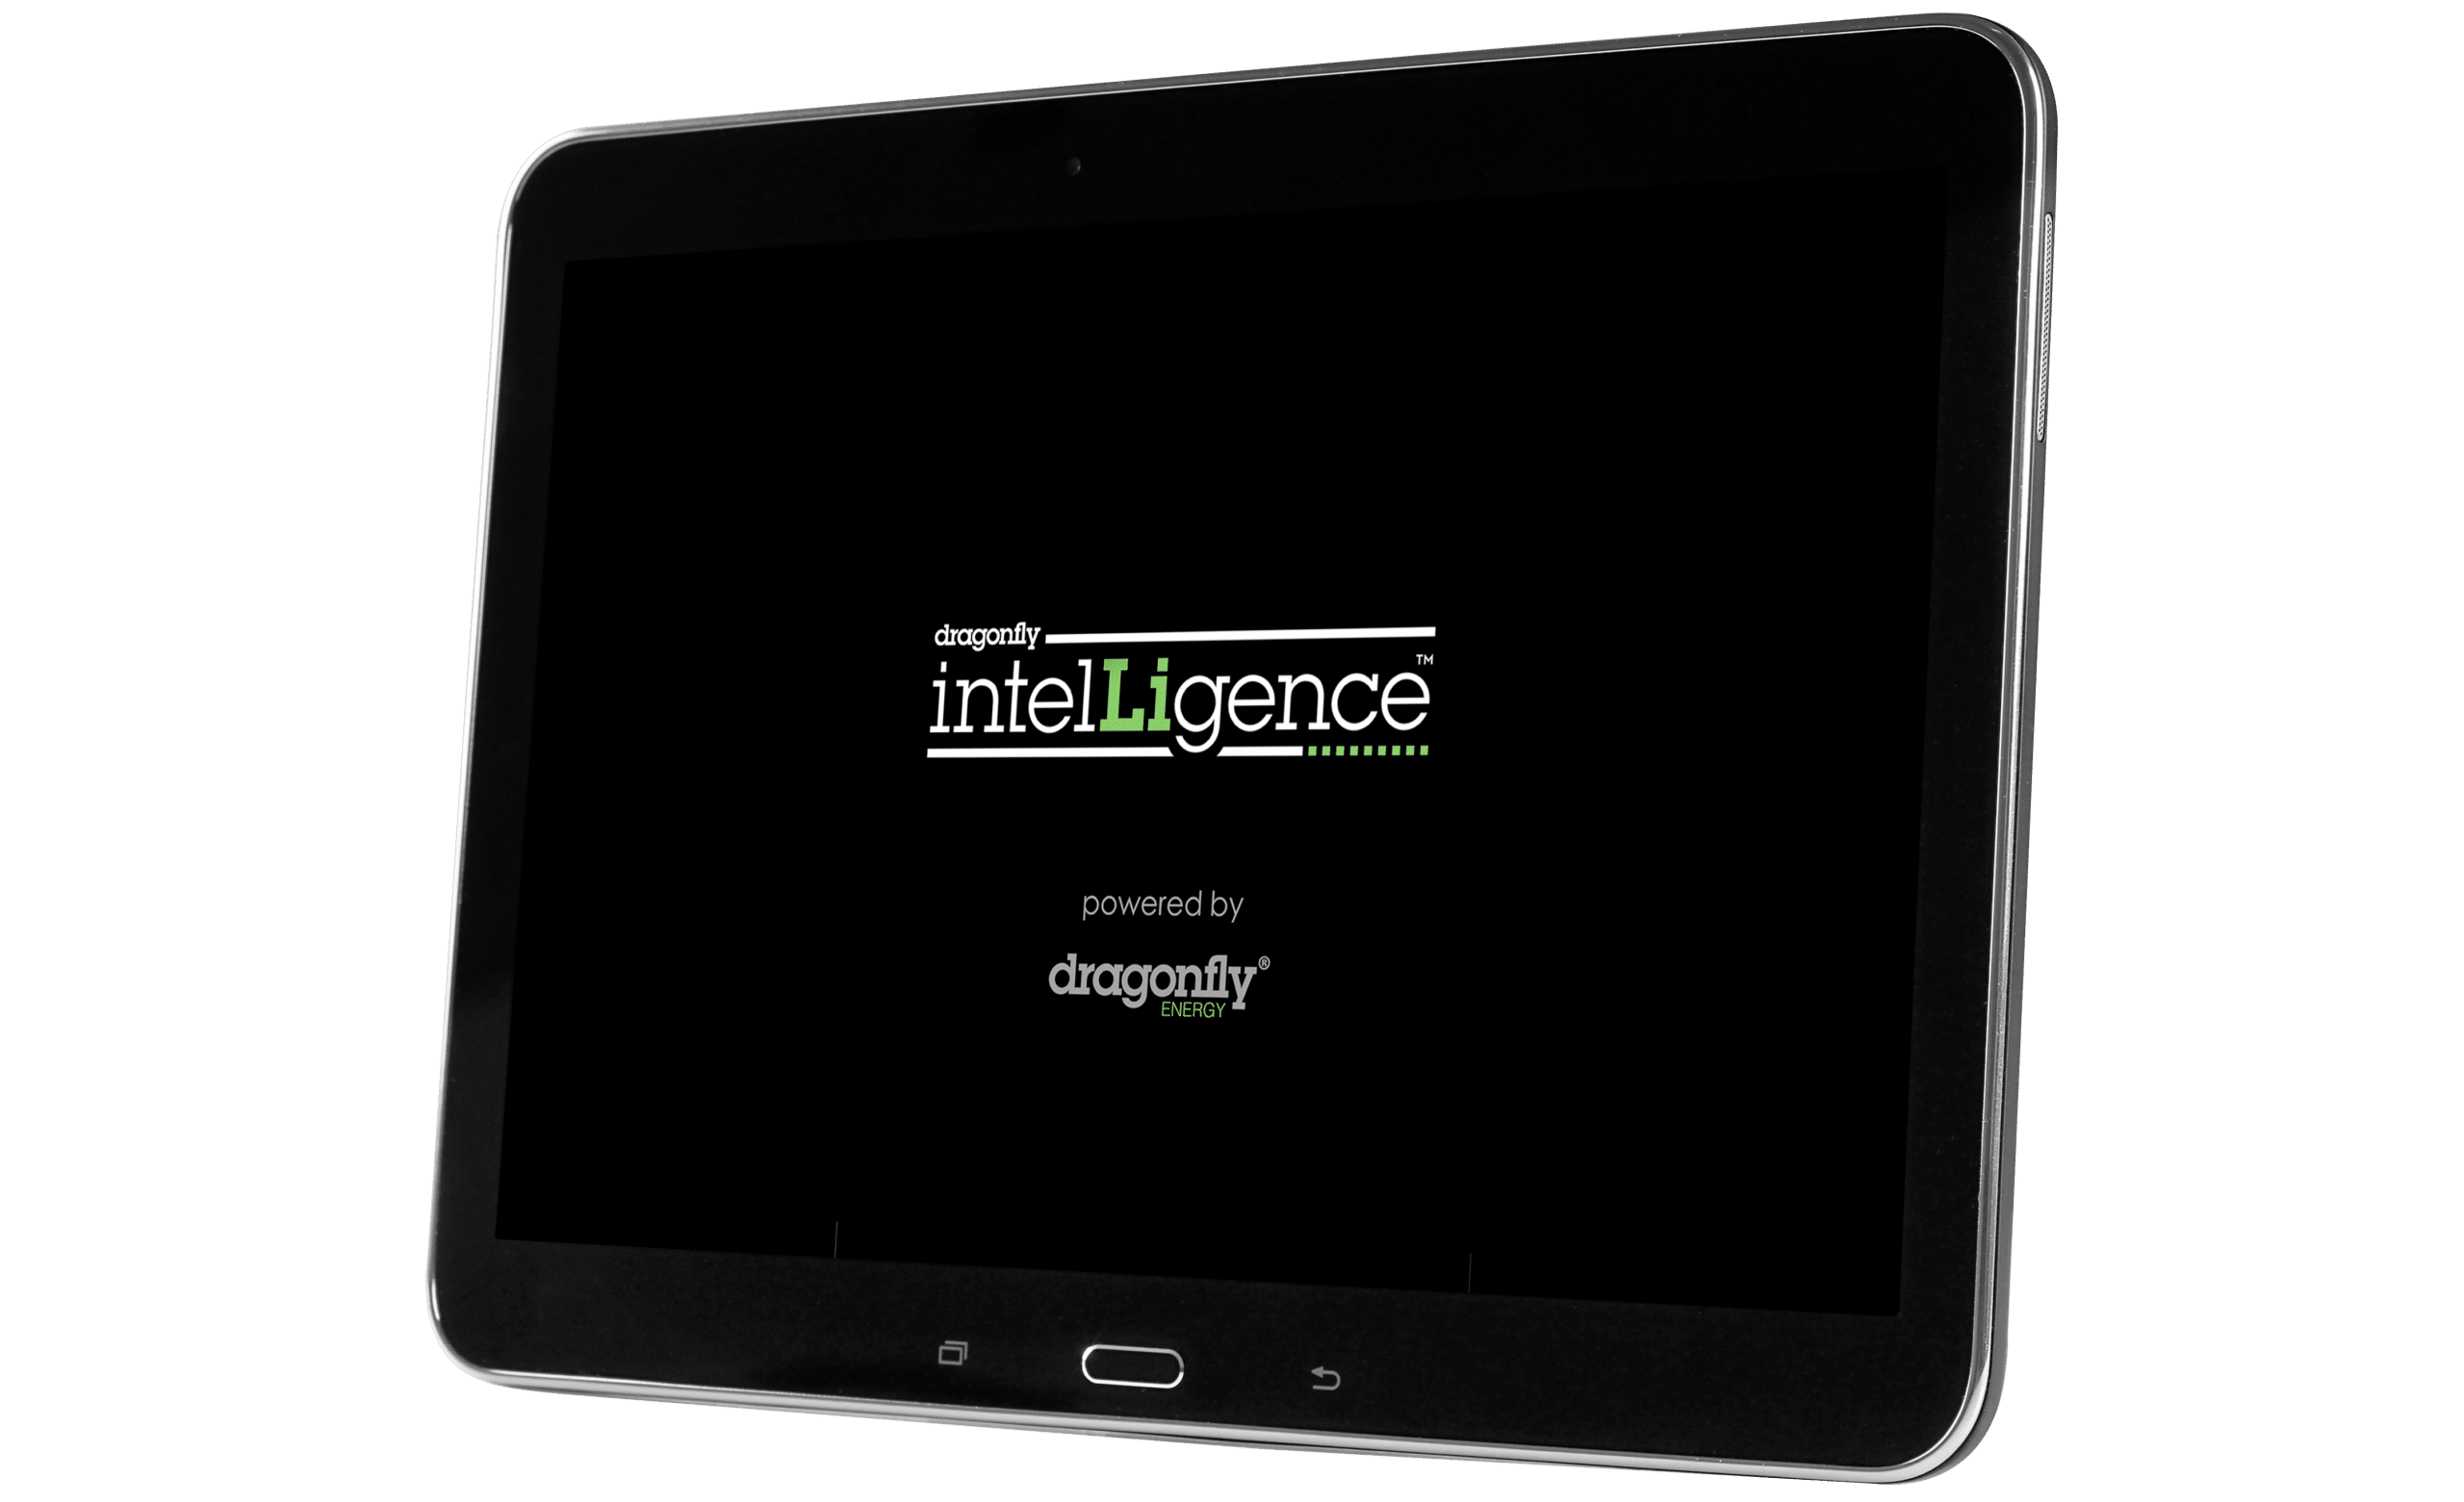 The Dragonfly Energy Mobile App allows users to remotely monitor, configure and optimize their Smart Lithium Battery systems featuring Dragonfly IntelLigence™. The Dragonfly IntelLigence App is compatible with the Dragonfly Wing